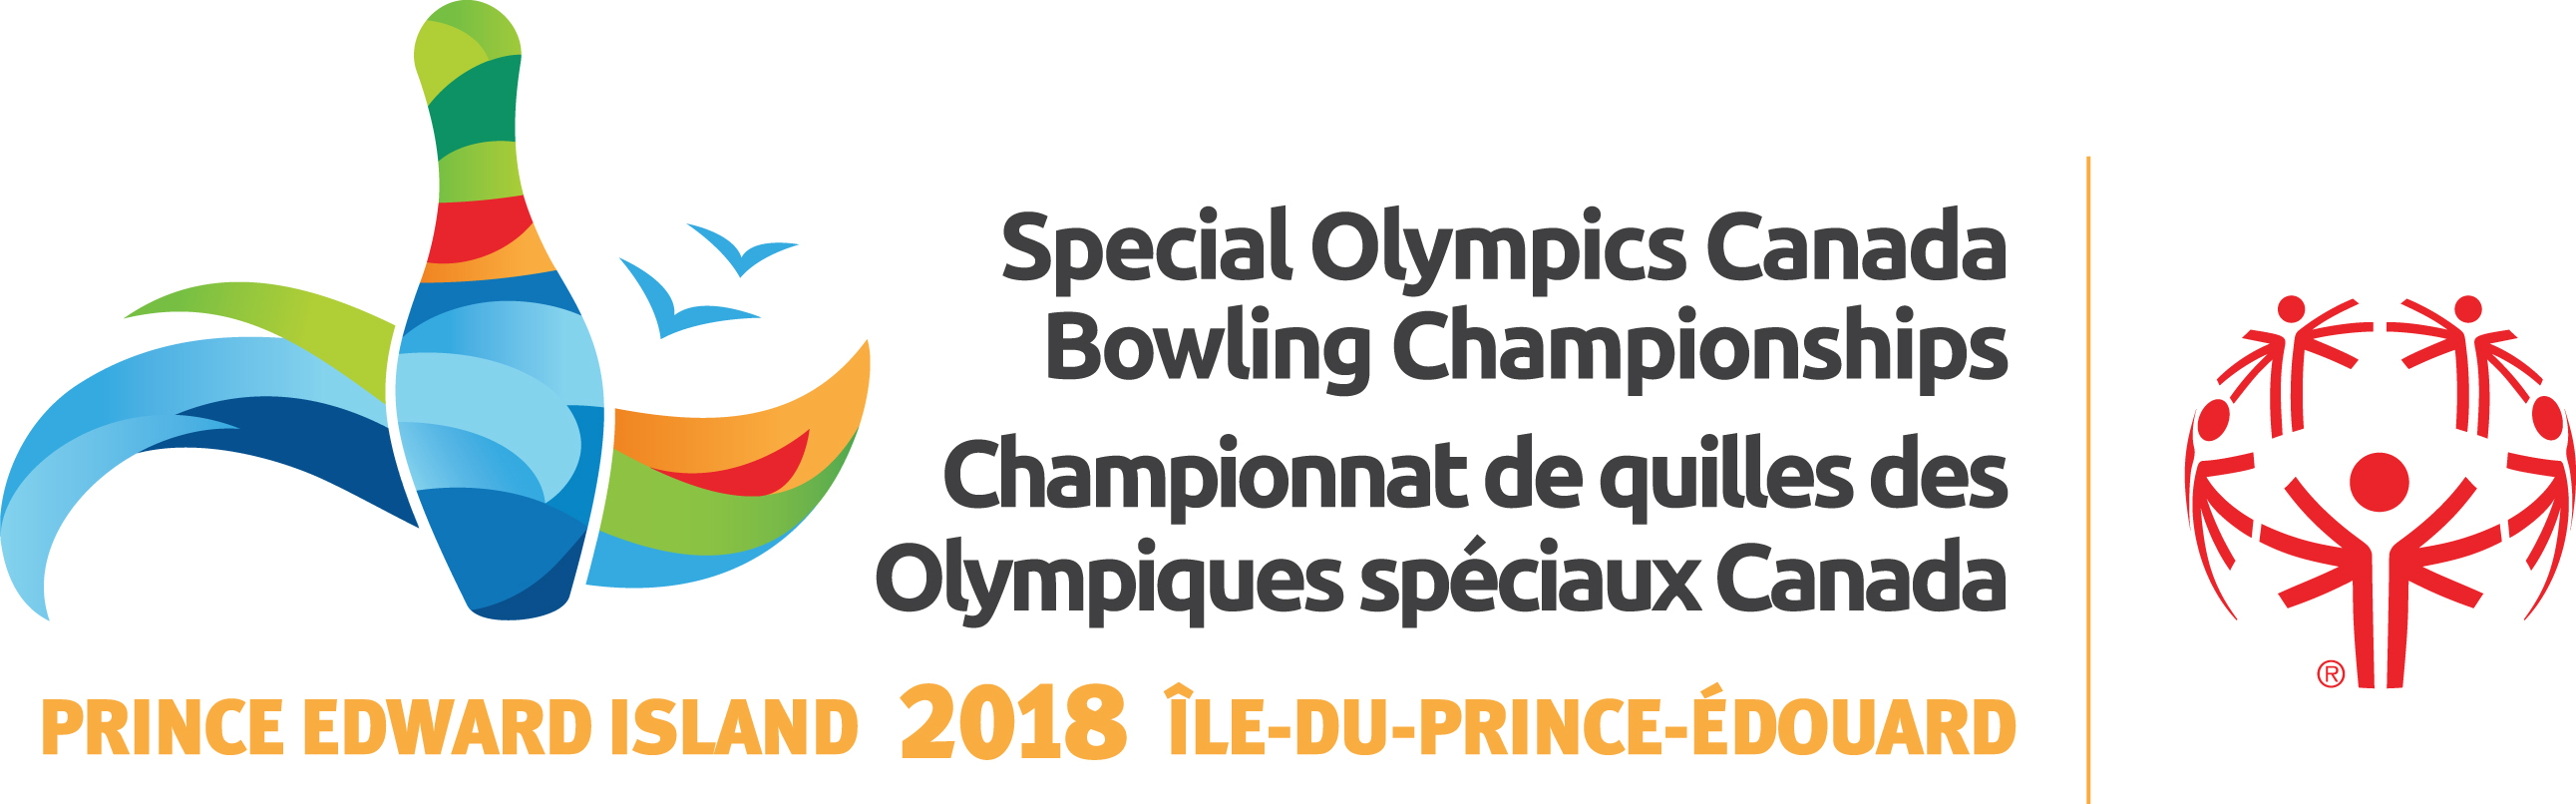 2018 Special Olympics Canada Bowling Championships Special Olympics